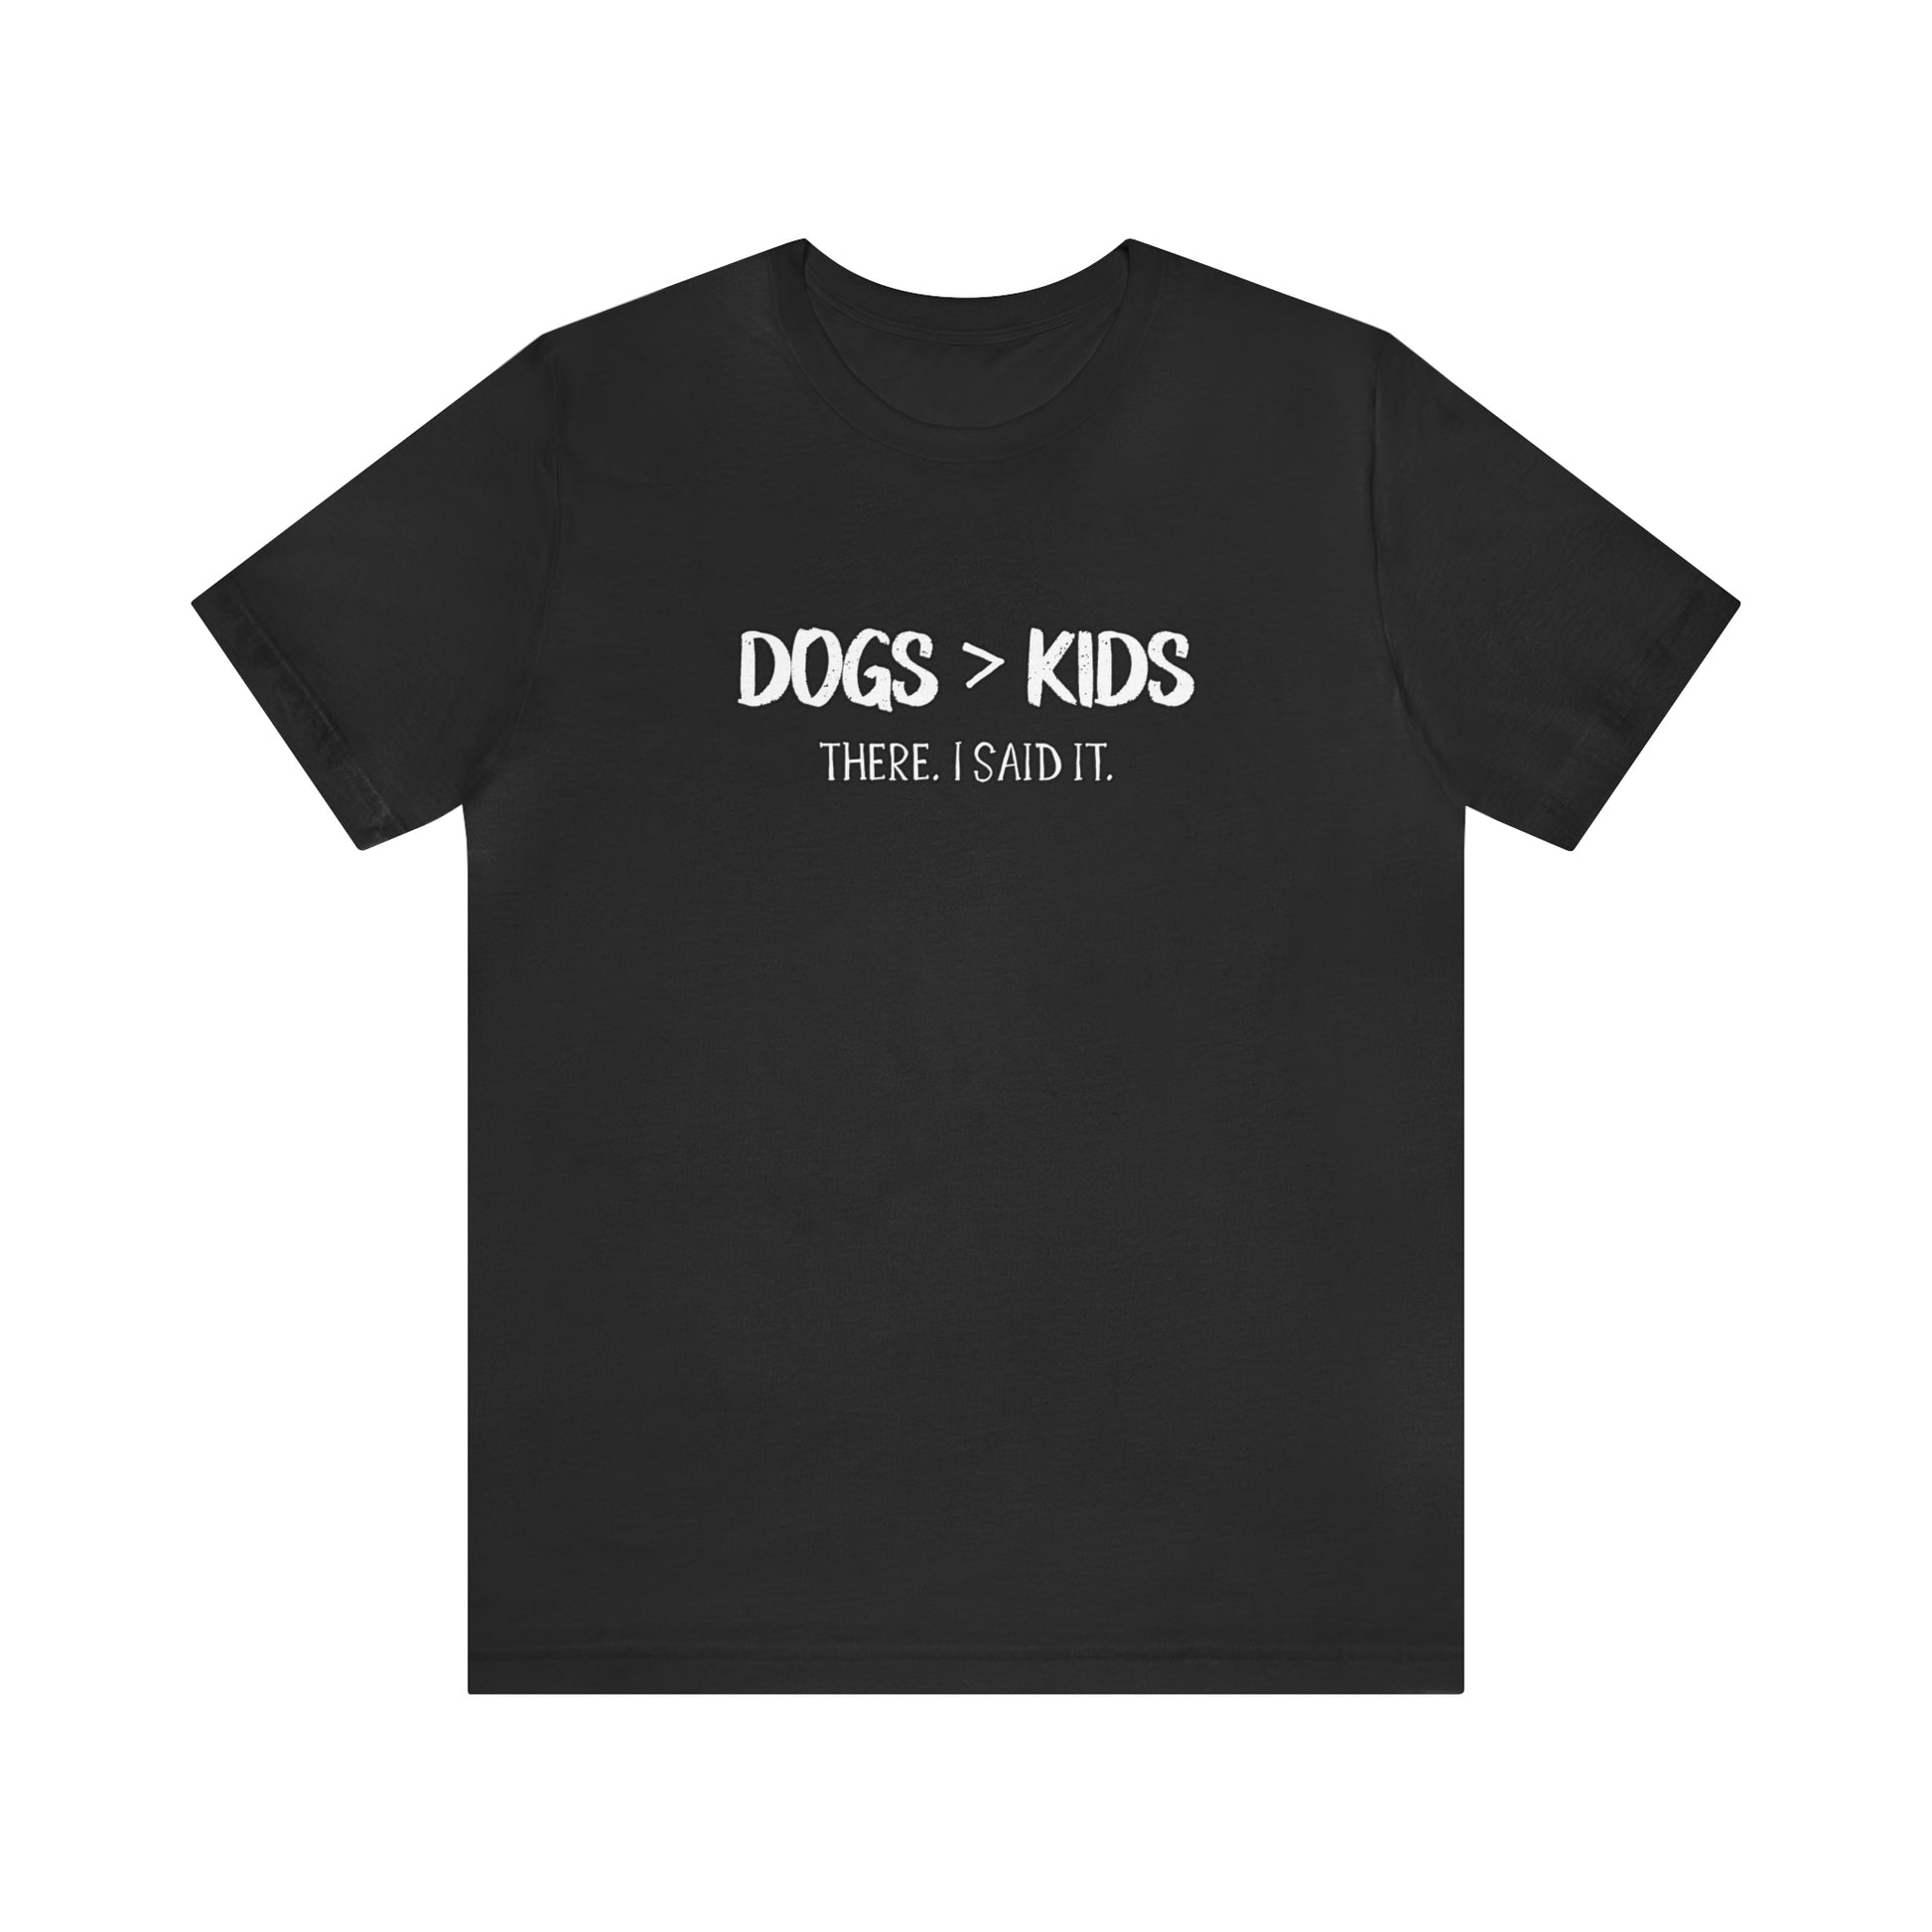 dogs are better than kids t shirt